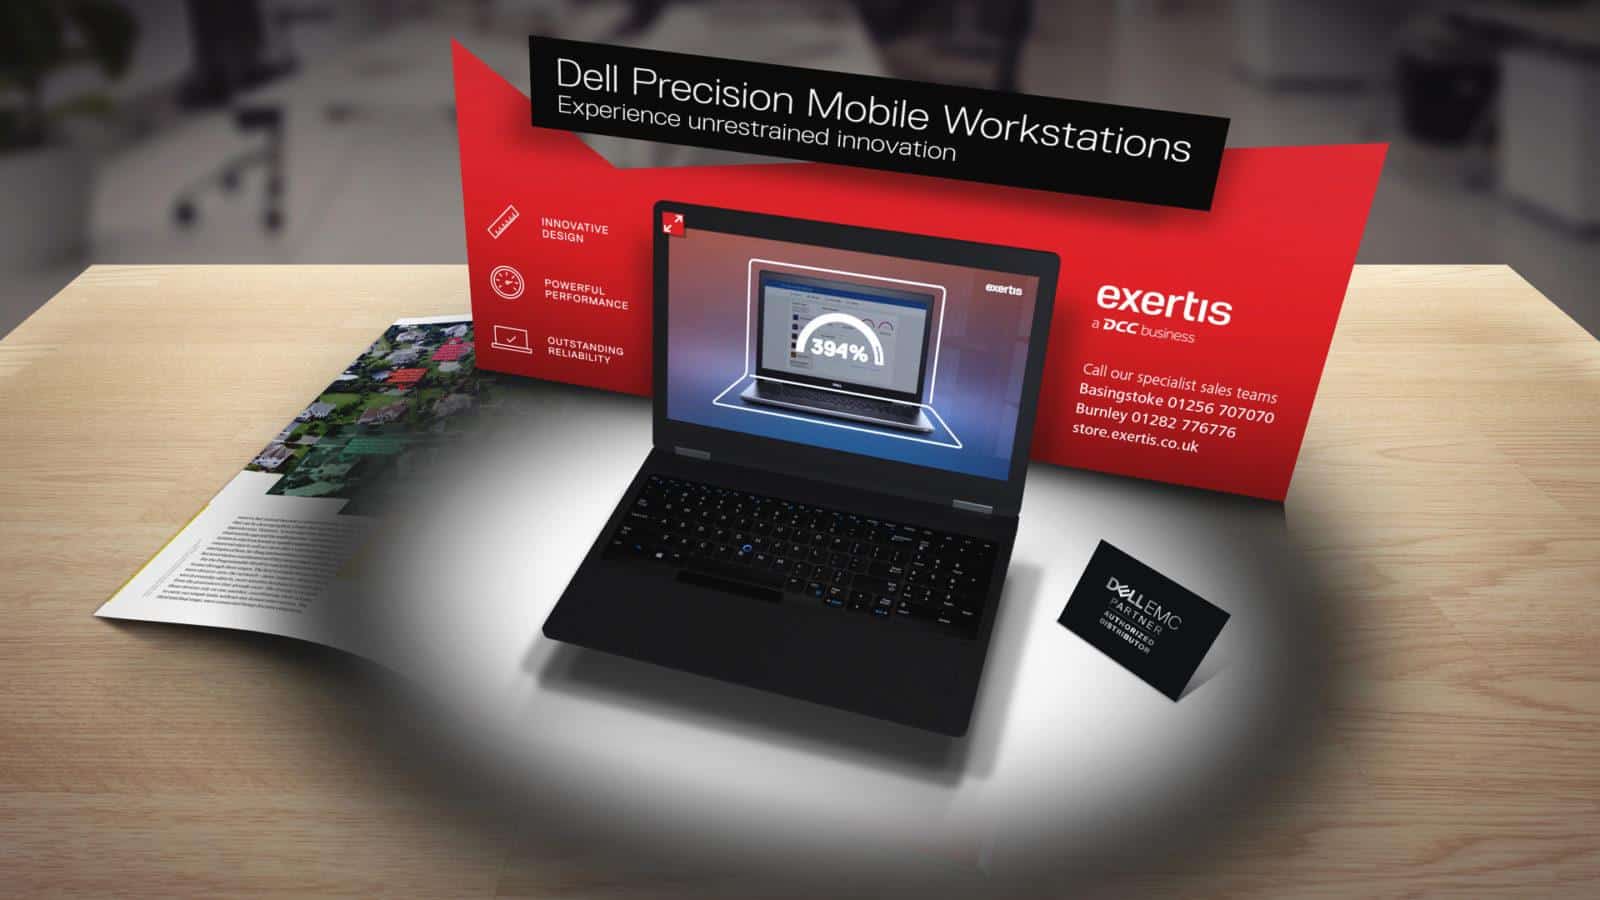 Exertis Augmented Reality B2B Sales Channel - Dell Precision